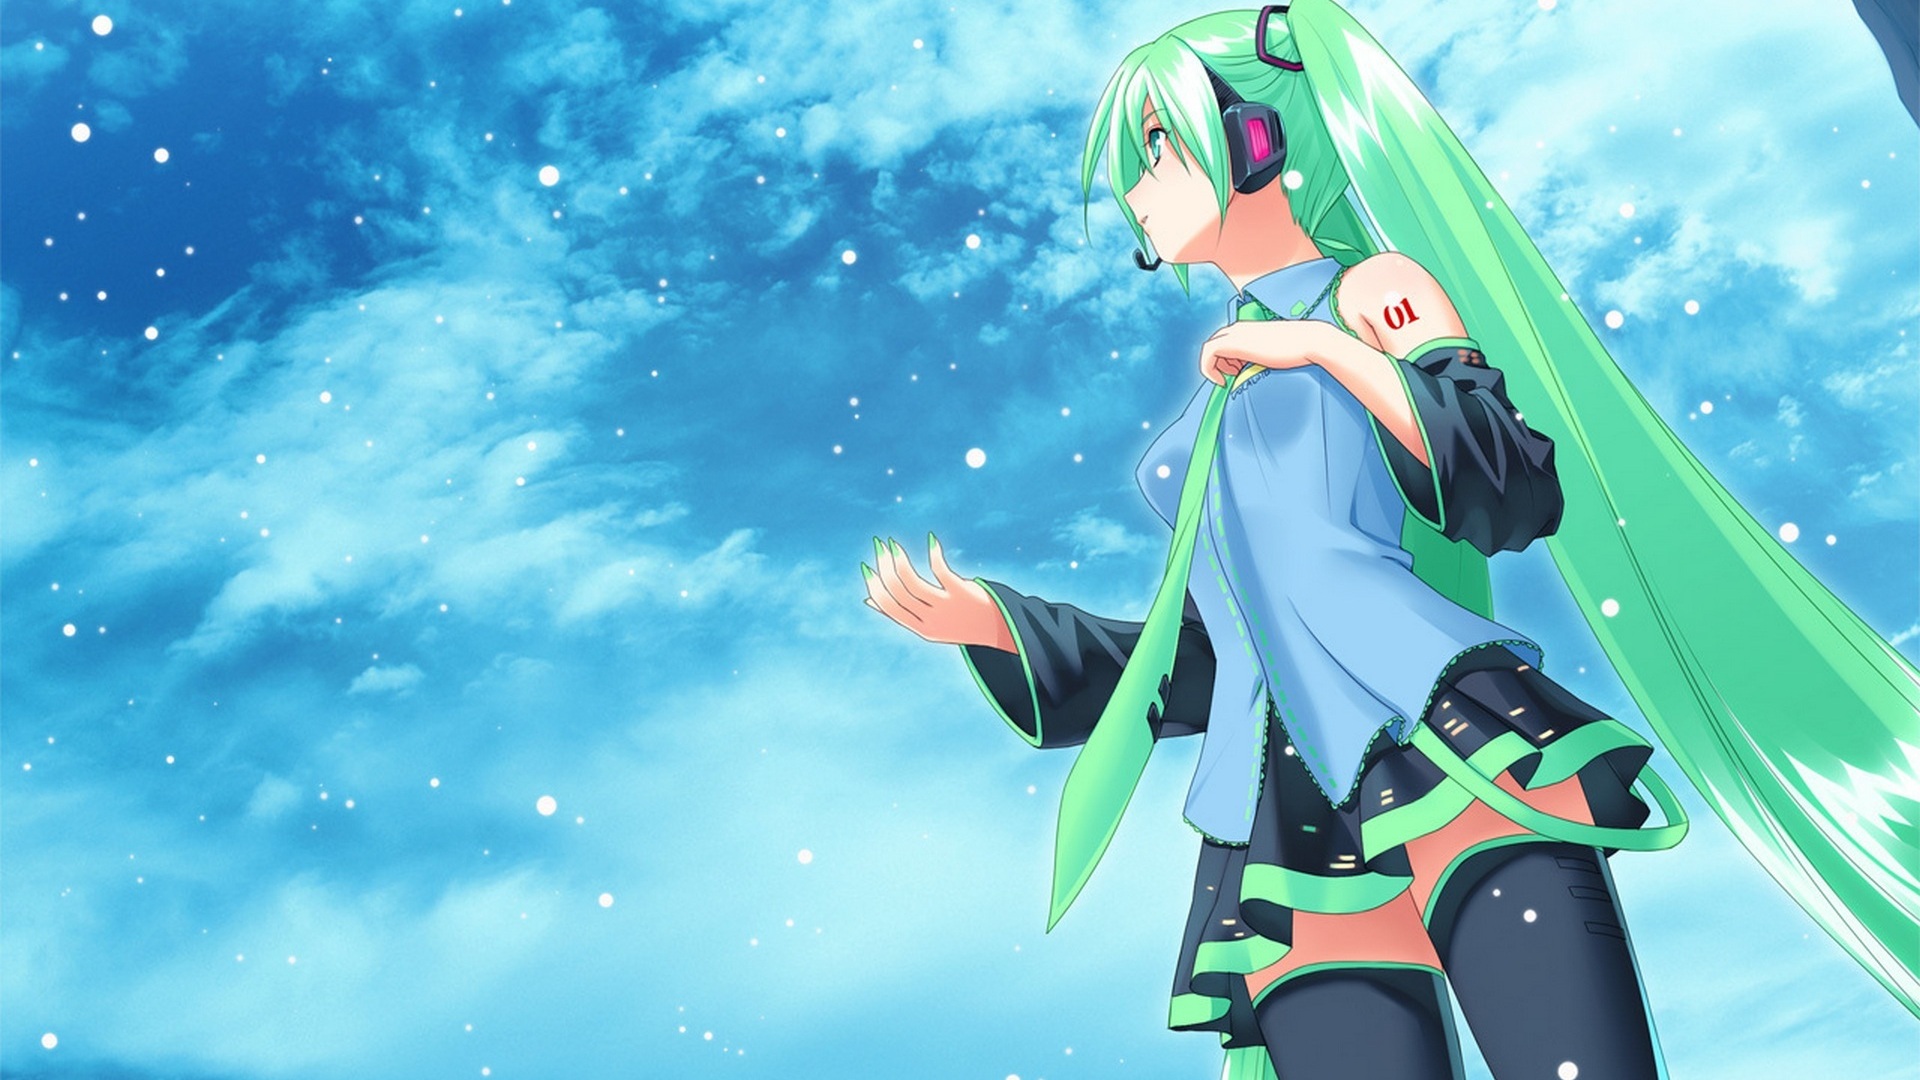 Free download Download green haired HD anime girl wallpaper HD wallpaper [1920x1080] for your Desktop, Mobile & Tablet. Explore Anime Wallpaper HD. Manga Wallpaper, Cool Anime Wallpaper, Epic Anime Wallpaper